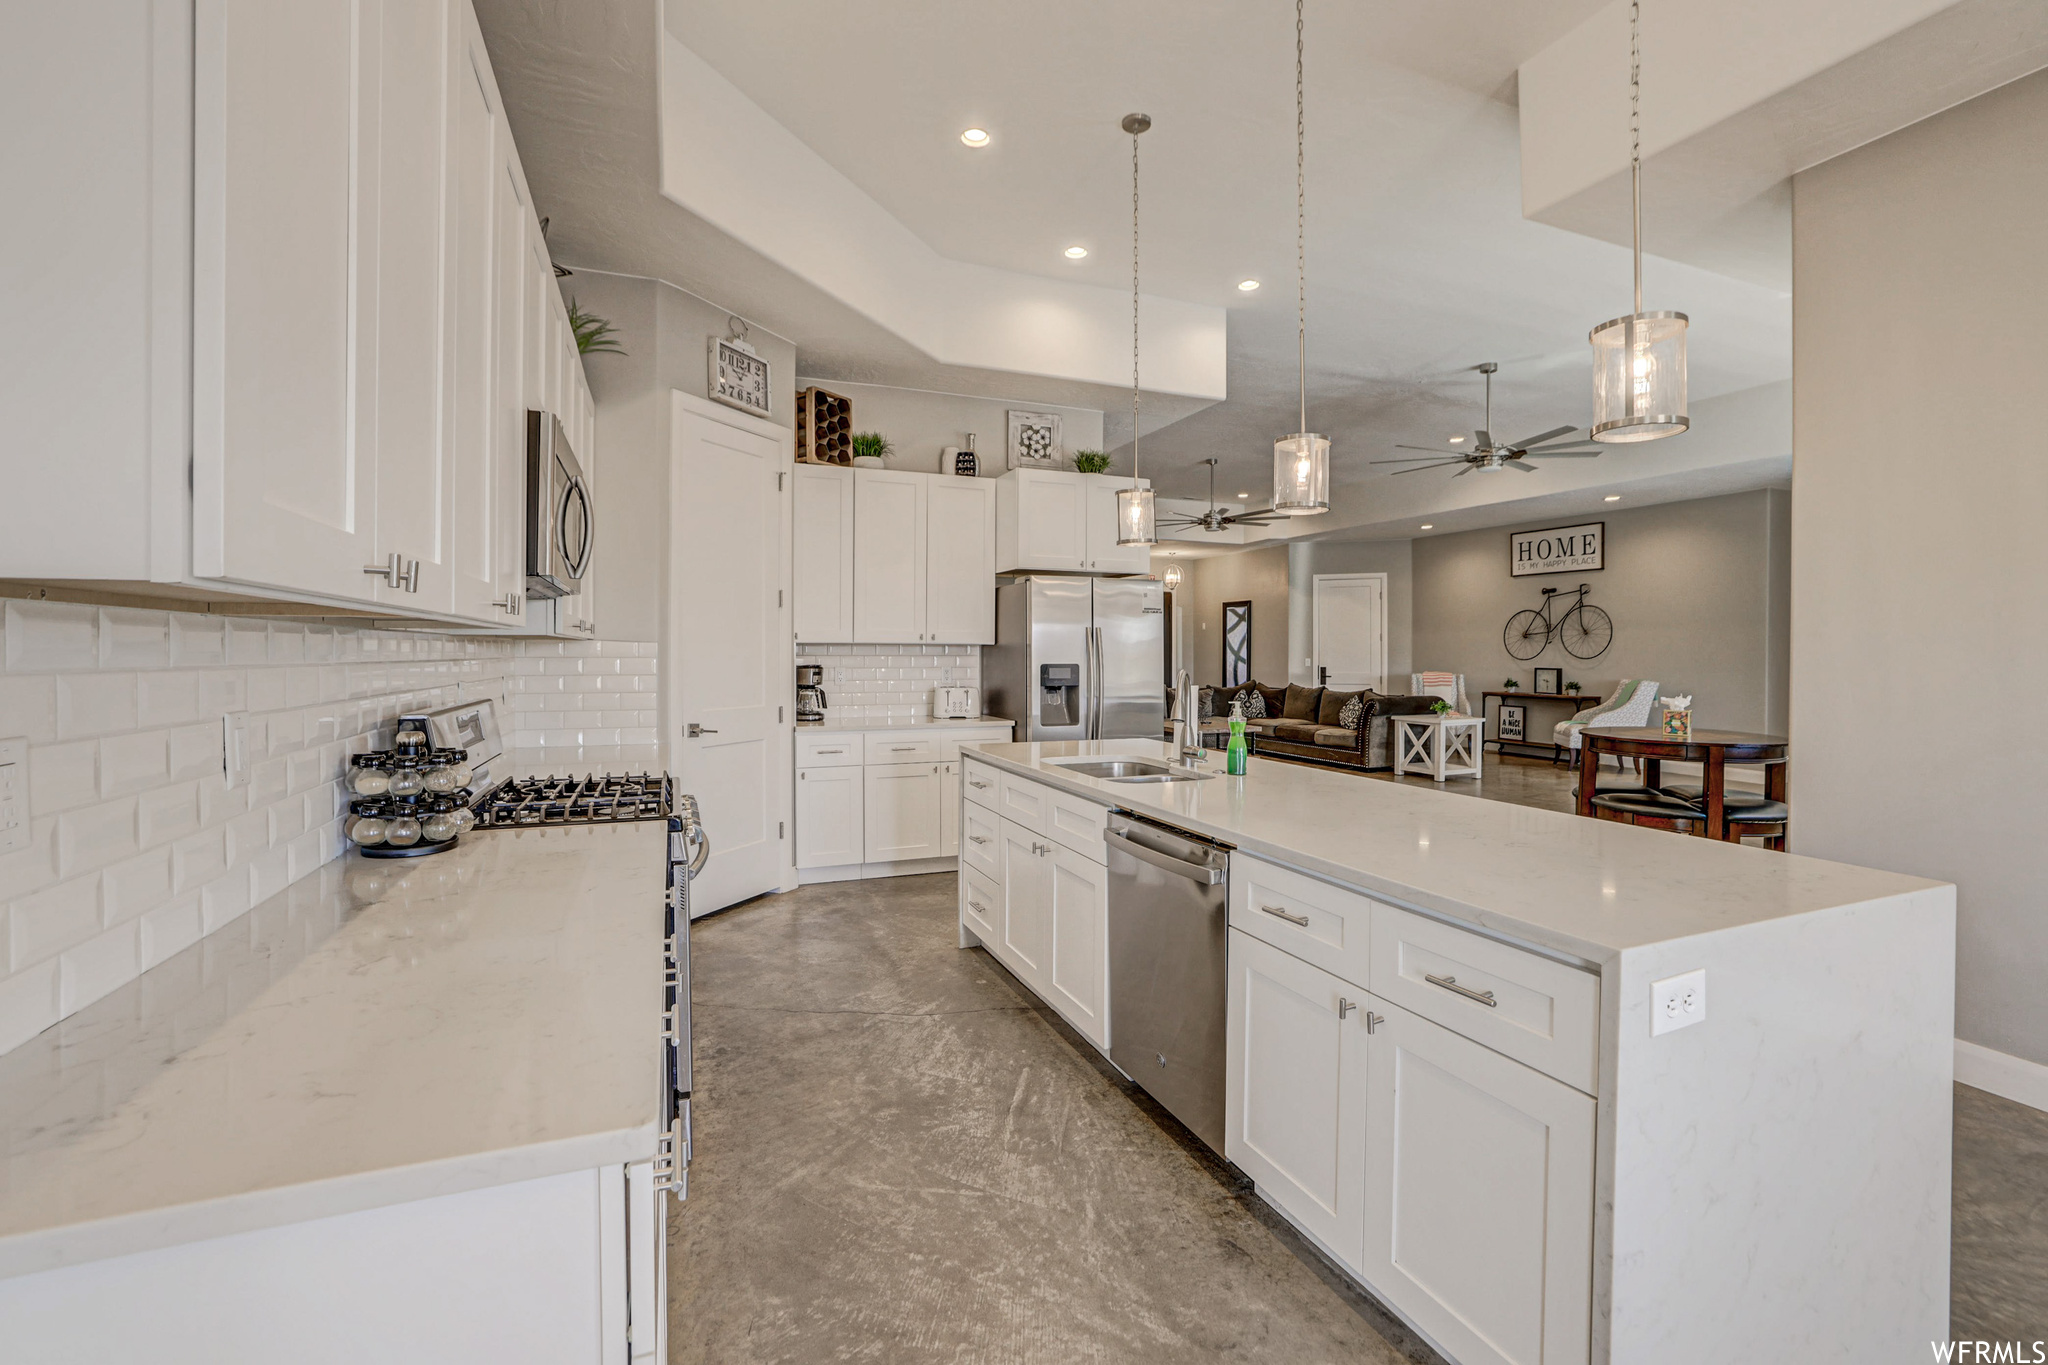 Kitchen featuring a ceiling fan, range oven, refrigerator, stainless steel dishwasher, microwave, light countertops, light tile floors, pendant lighting, and white cabinets